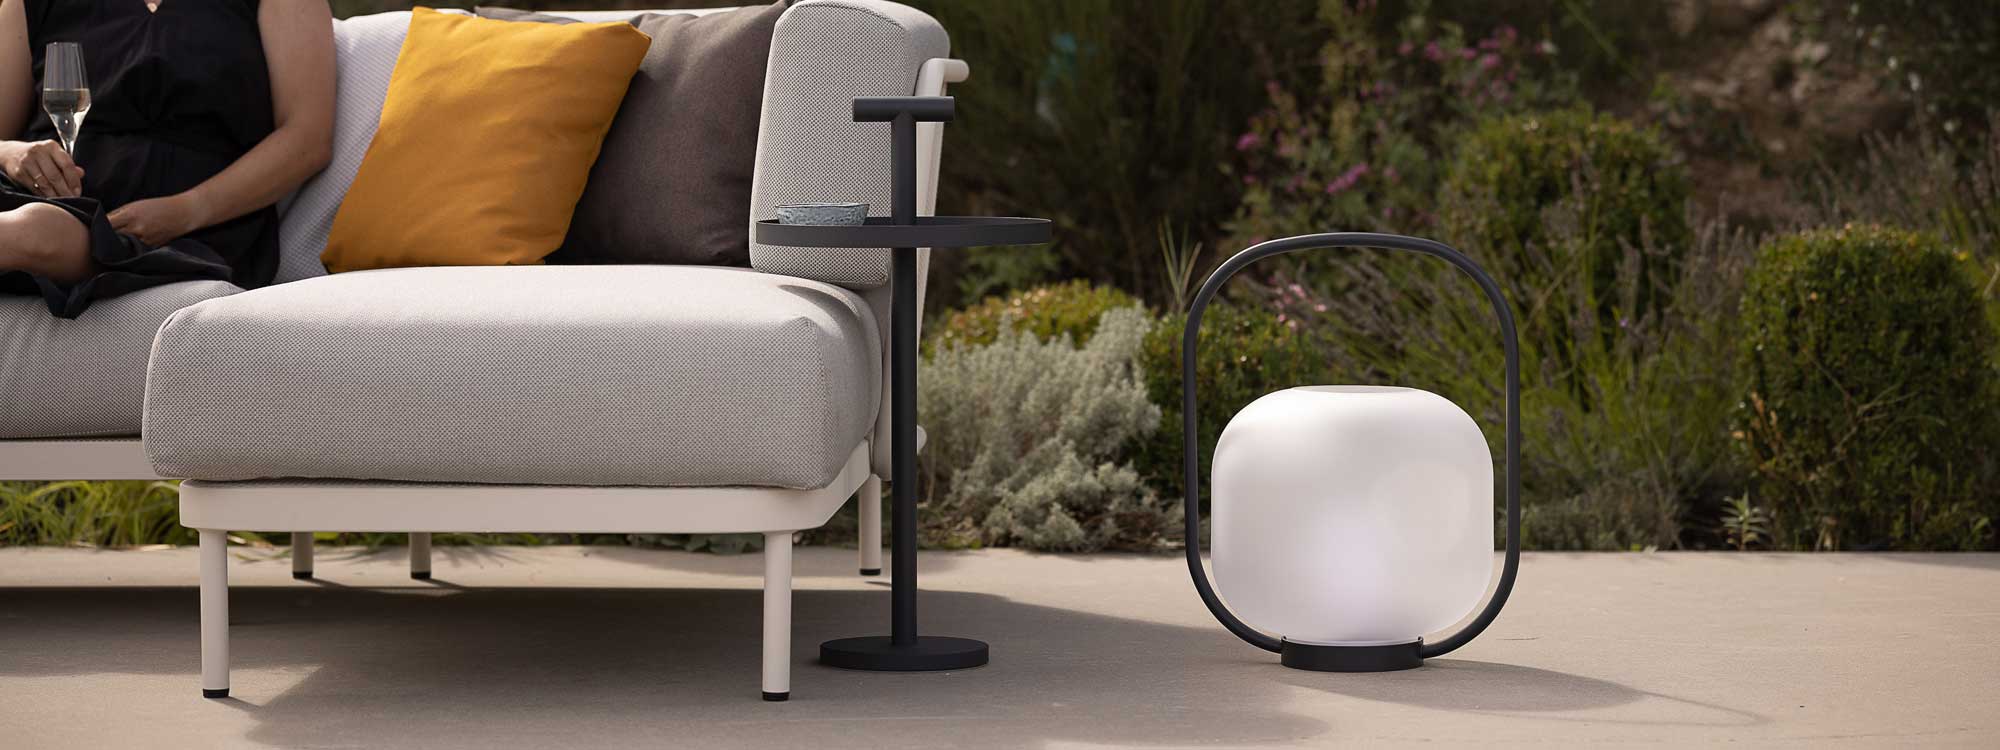 Albus table with handle is a groovy modern garden side table in all weather outdoor table materials by Todus luxury garden furniture.